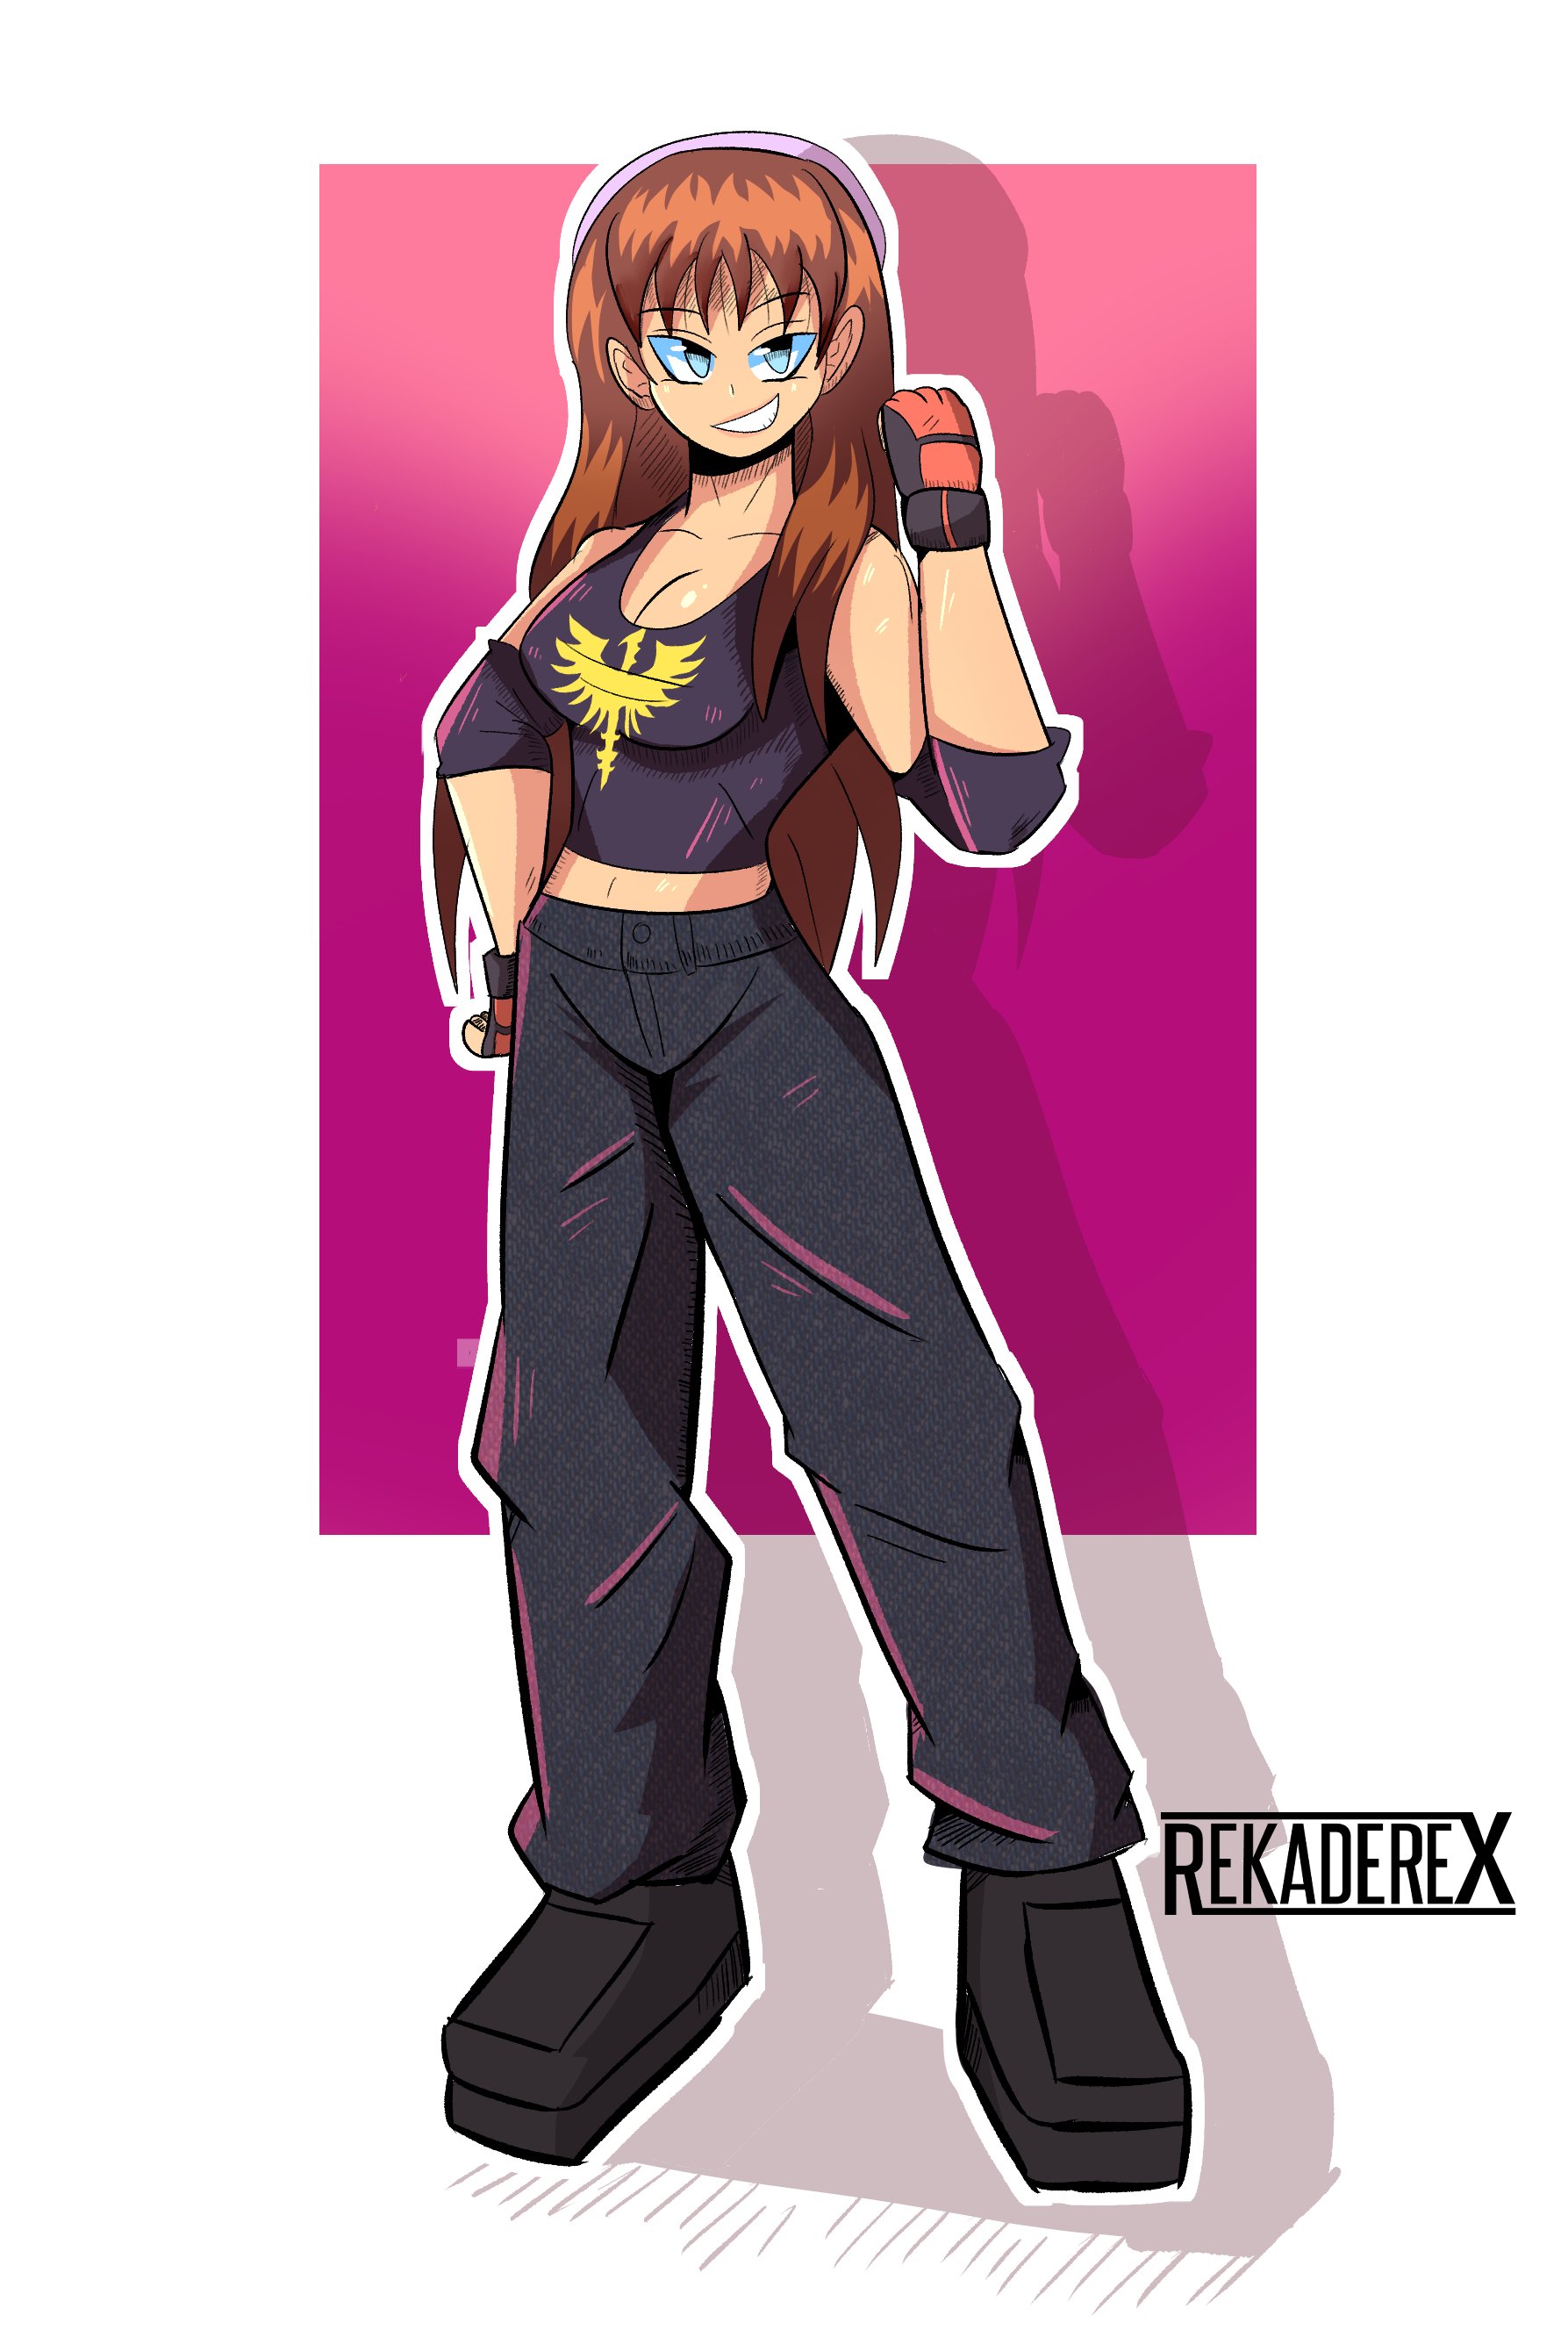 RekaderEX(Comms Open) on X: Hitomi From Dead or Alive #DeadOrAlive #anime  #fightinggames #digitalart  / X